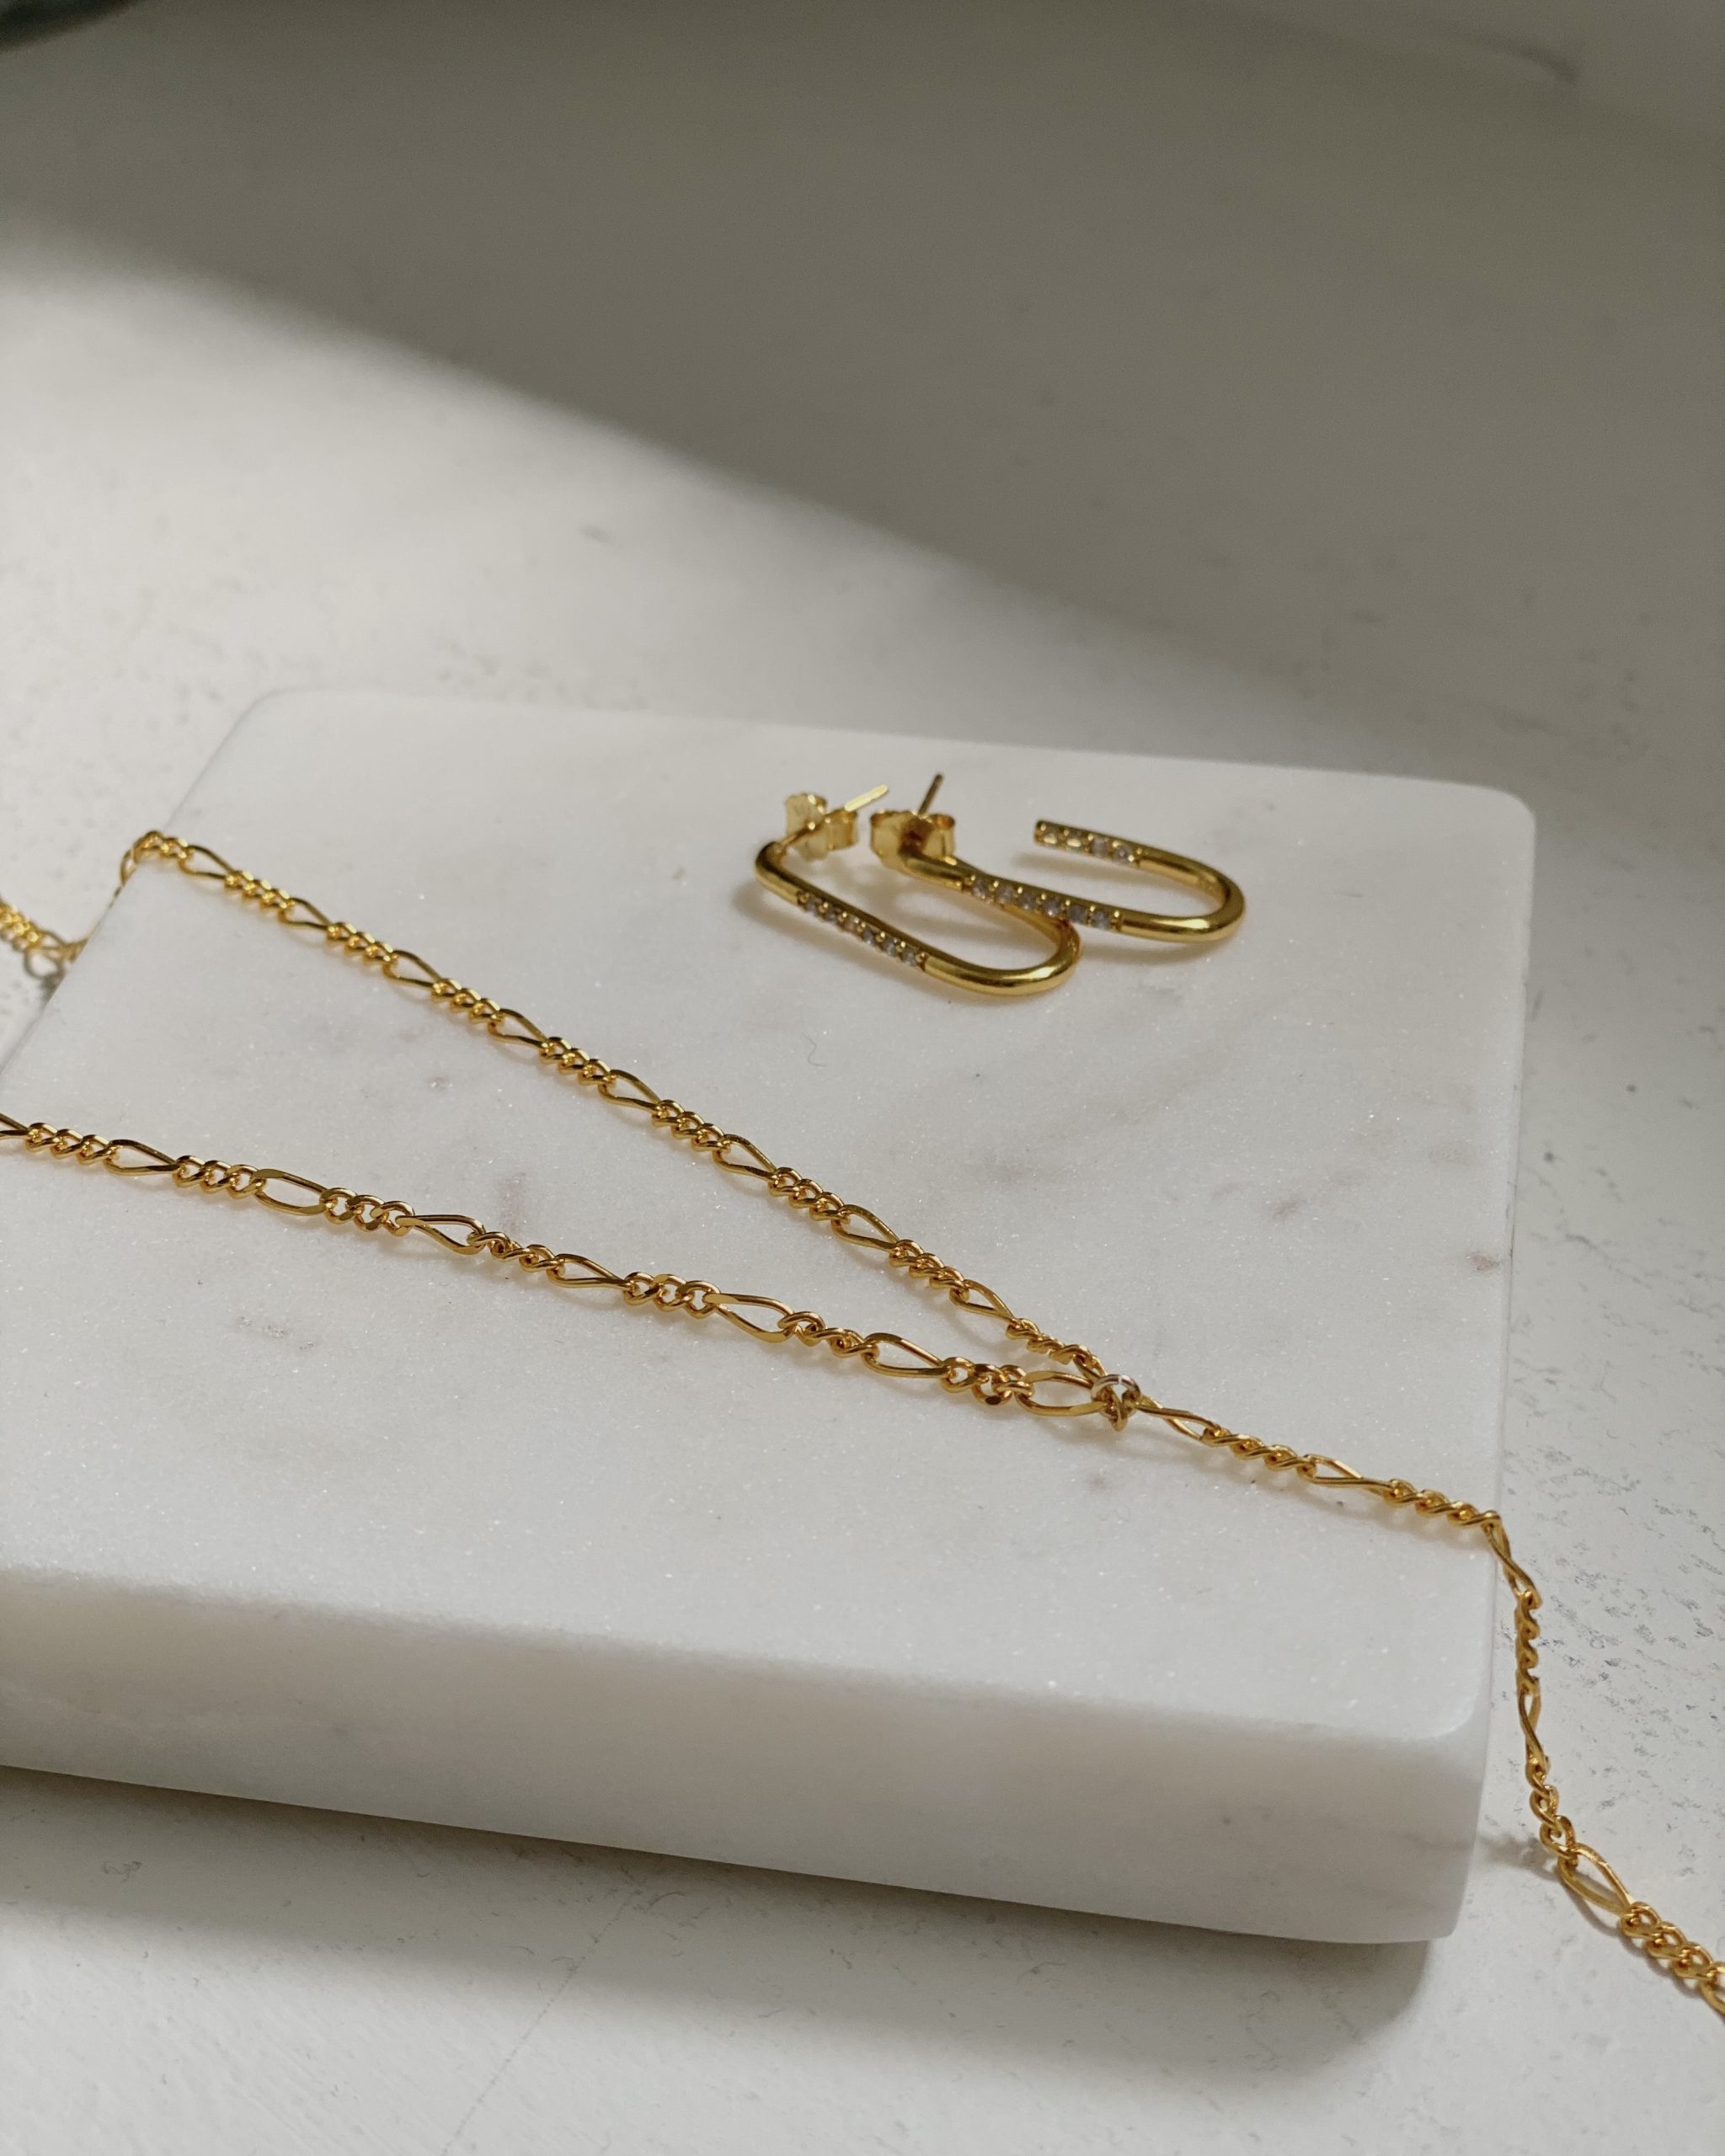 light dainty necklaces and earrings that works for both spring and summer